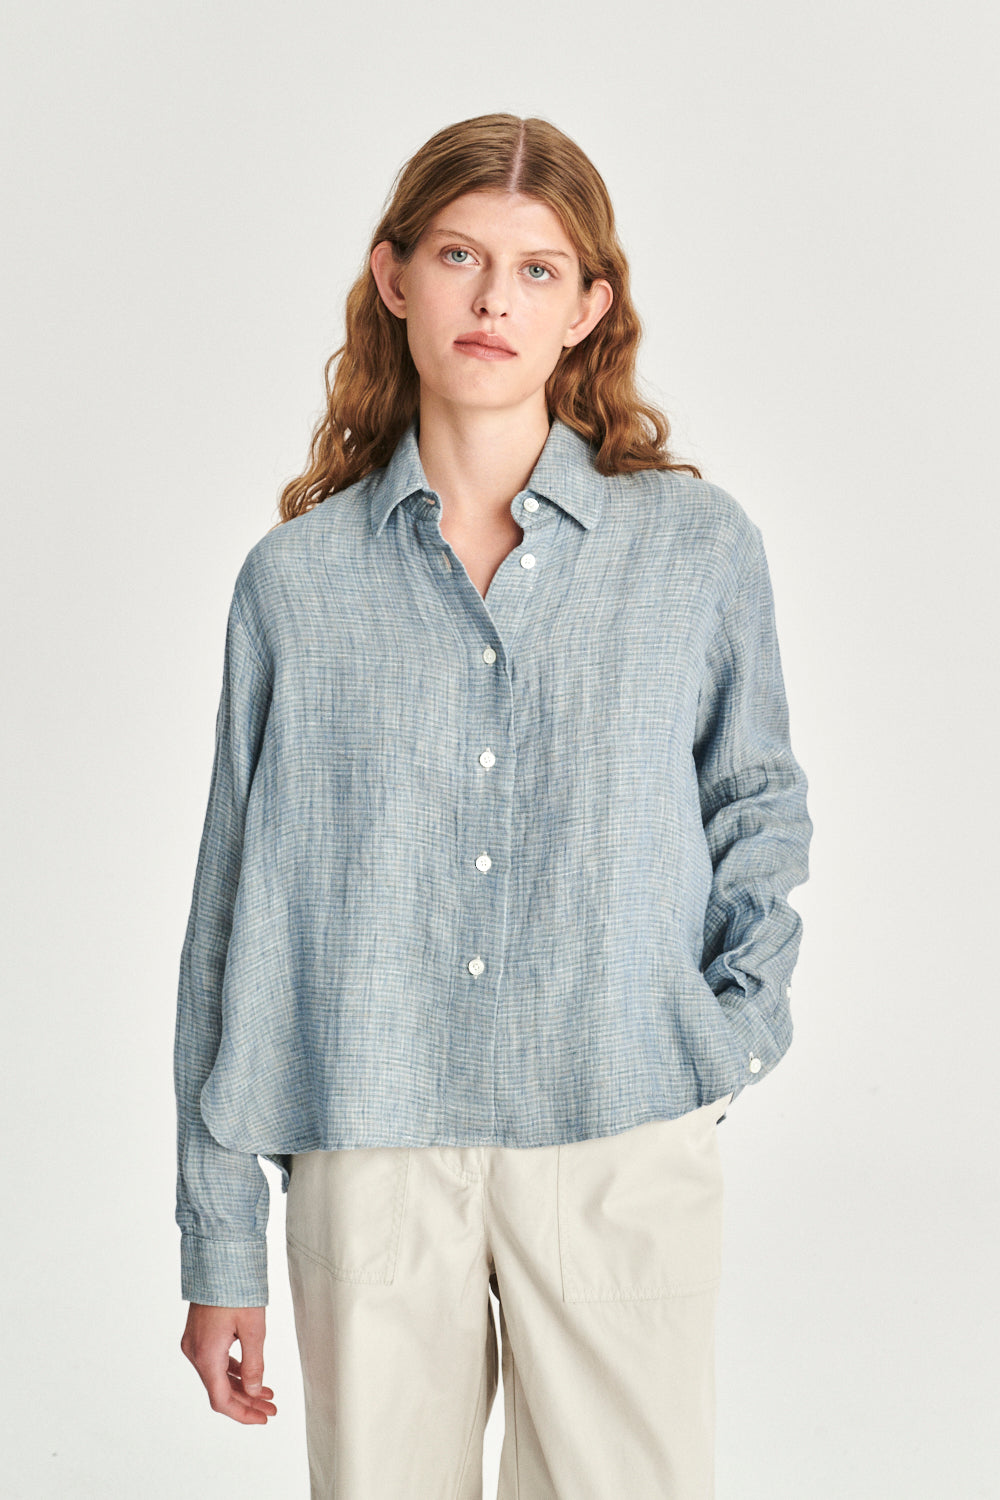 Relaxed Shirt in a Double Sided Blue and Green Italian Fatigue Linen and Cotton